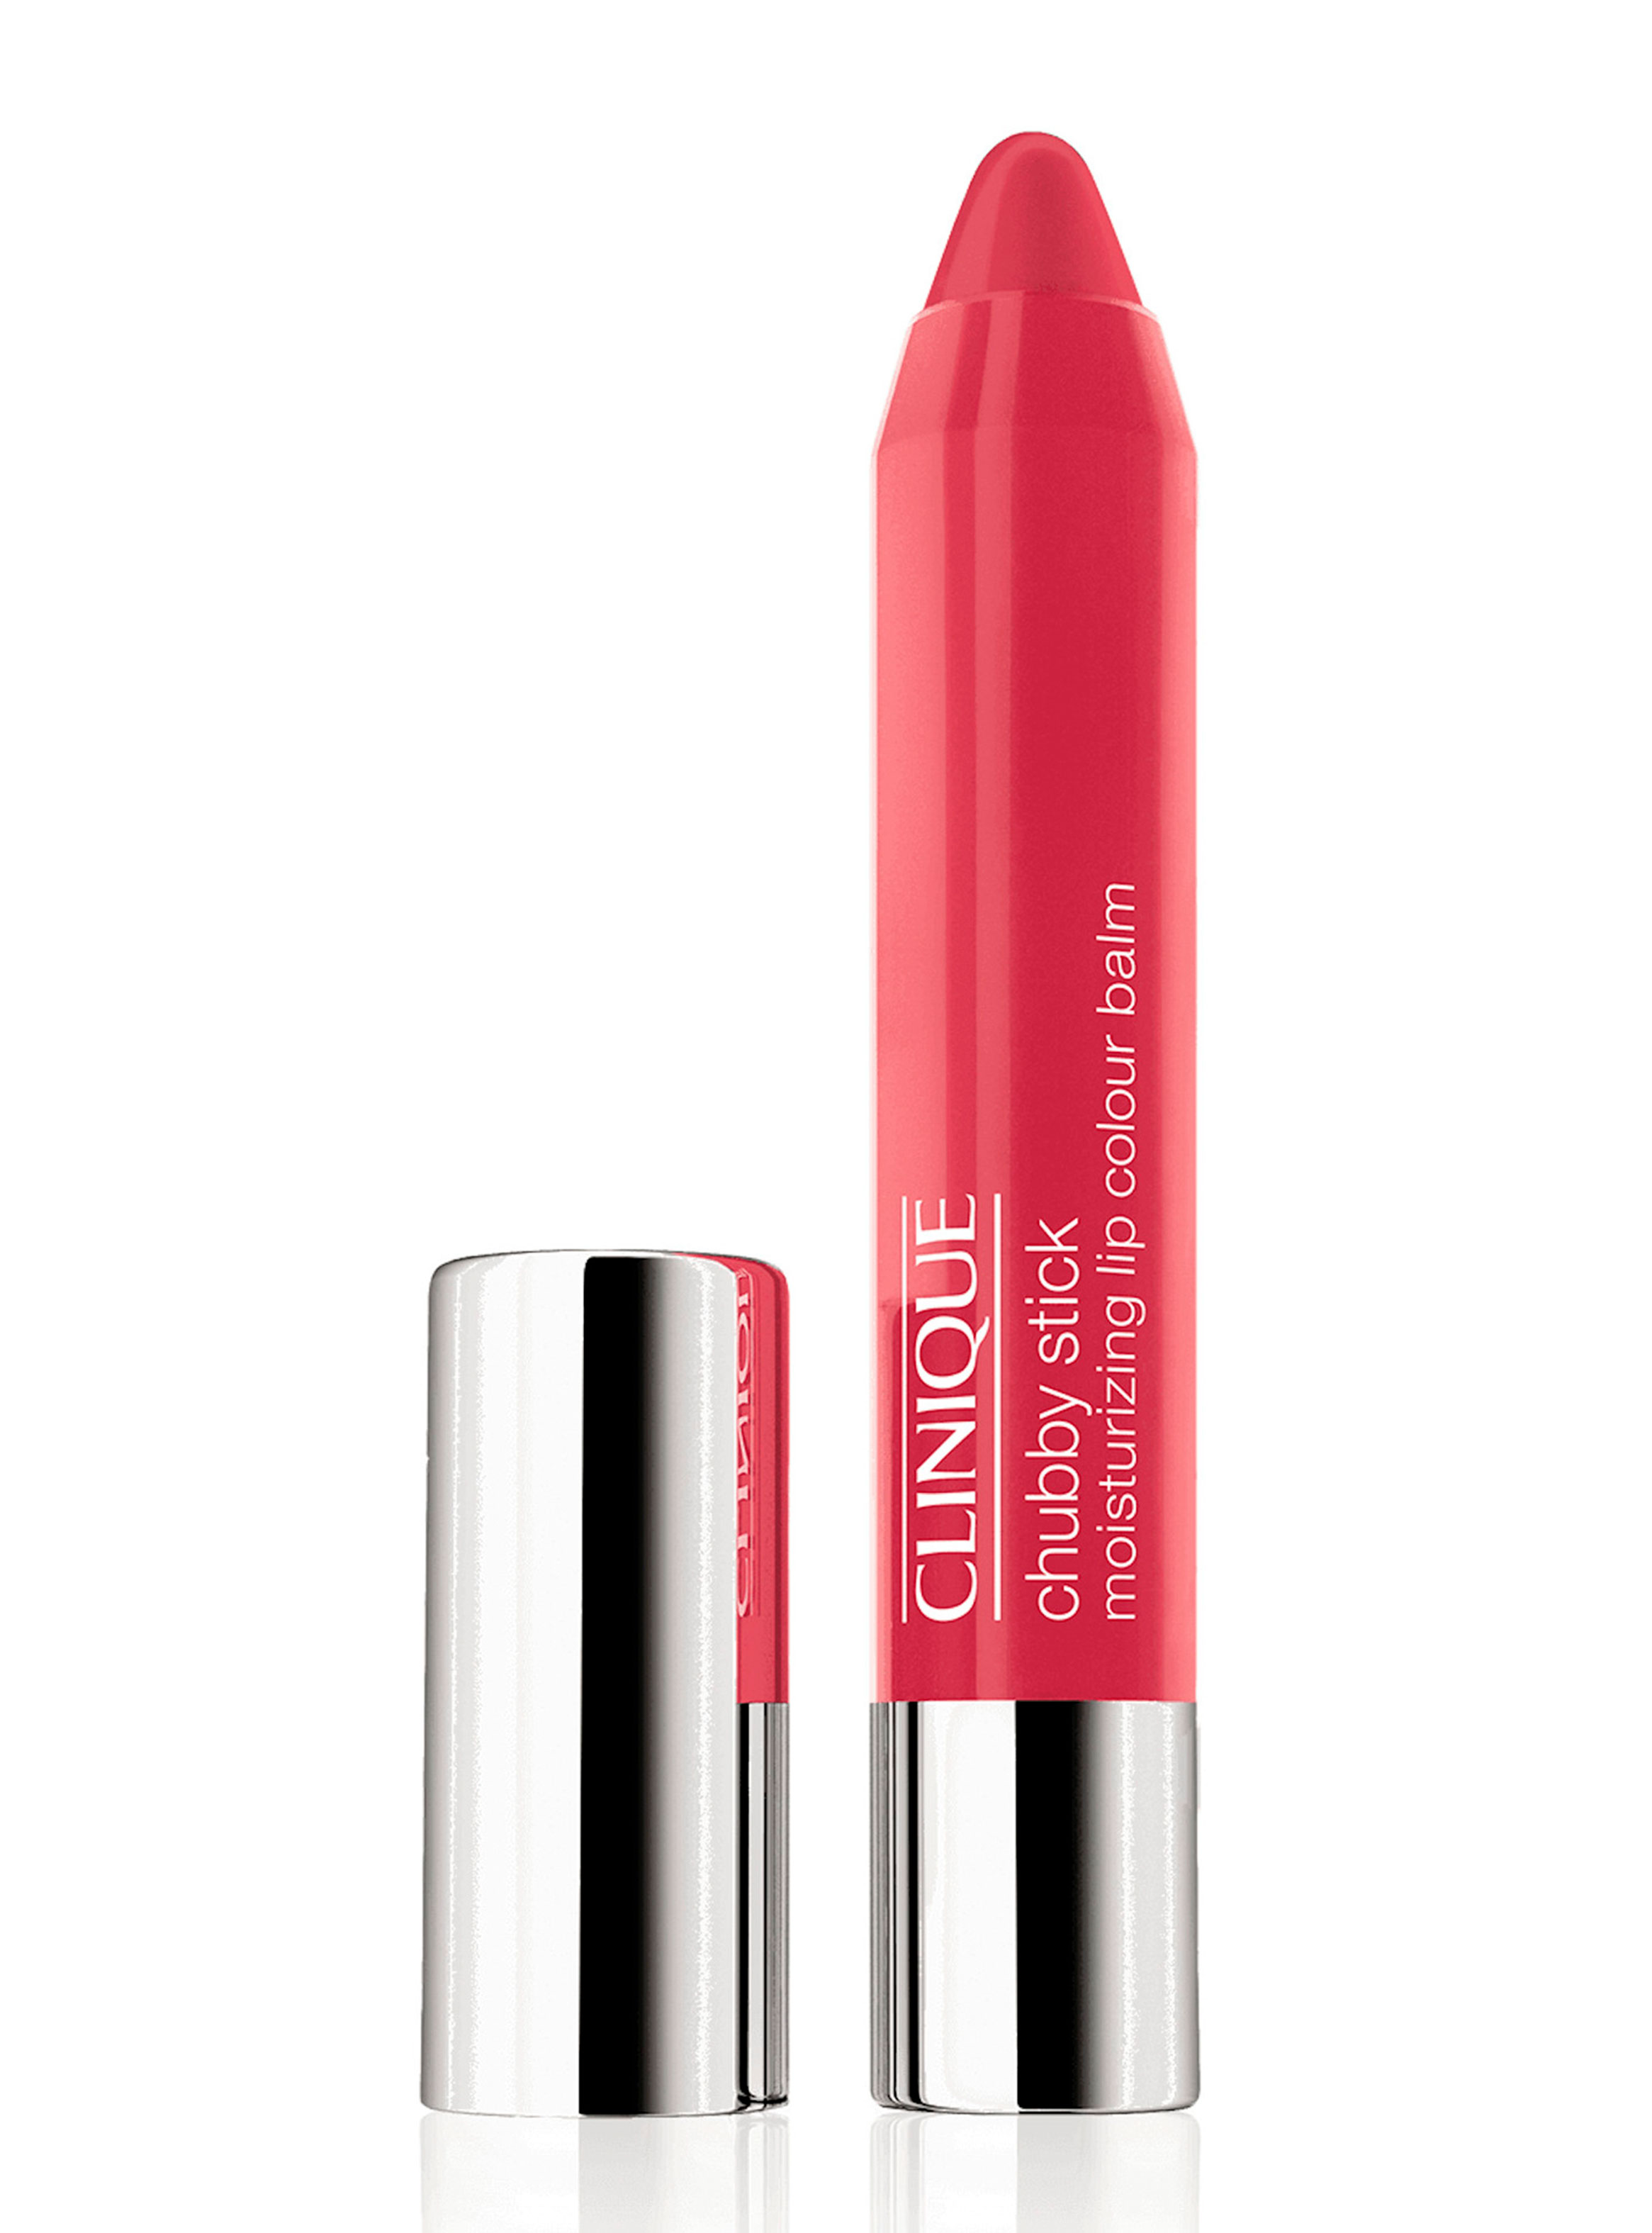 Bálsamo Clinique Labial Chubby Stick Mighty Mimosa